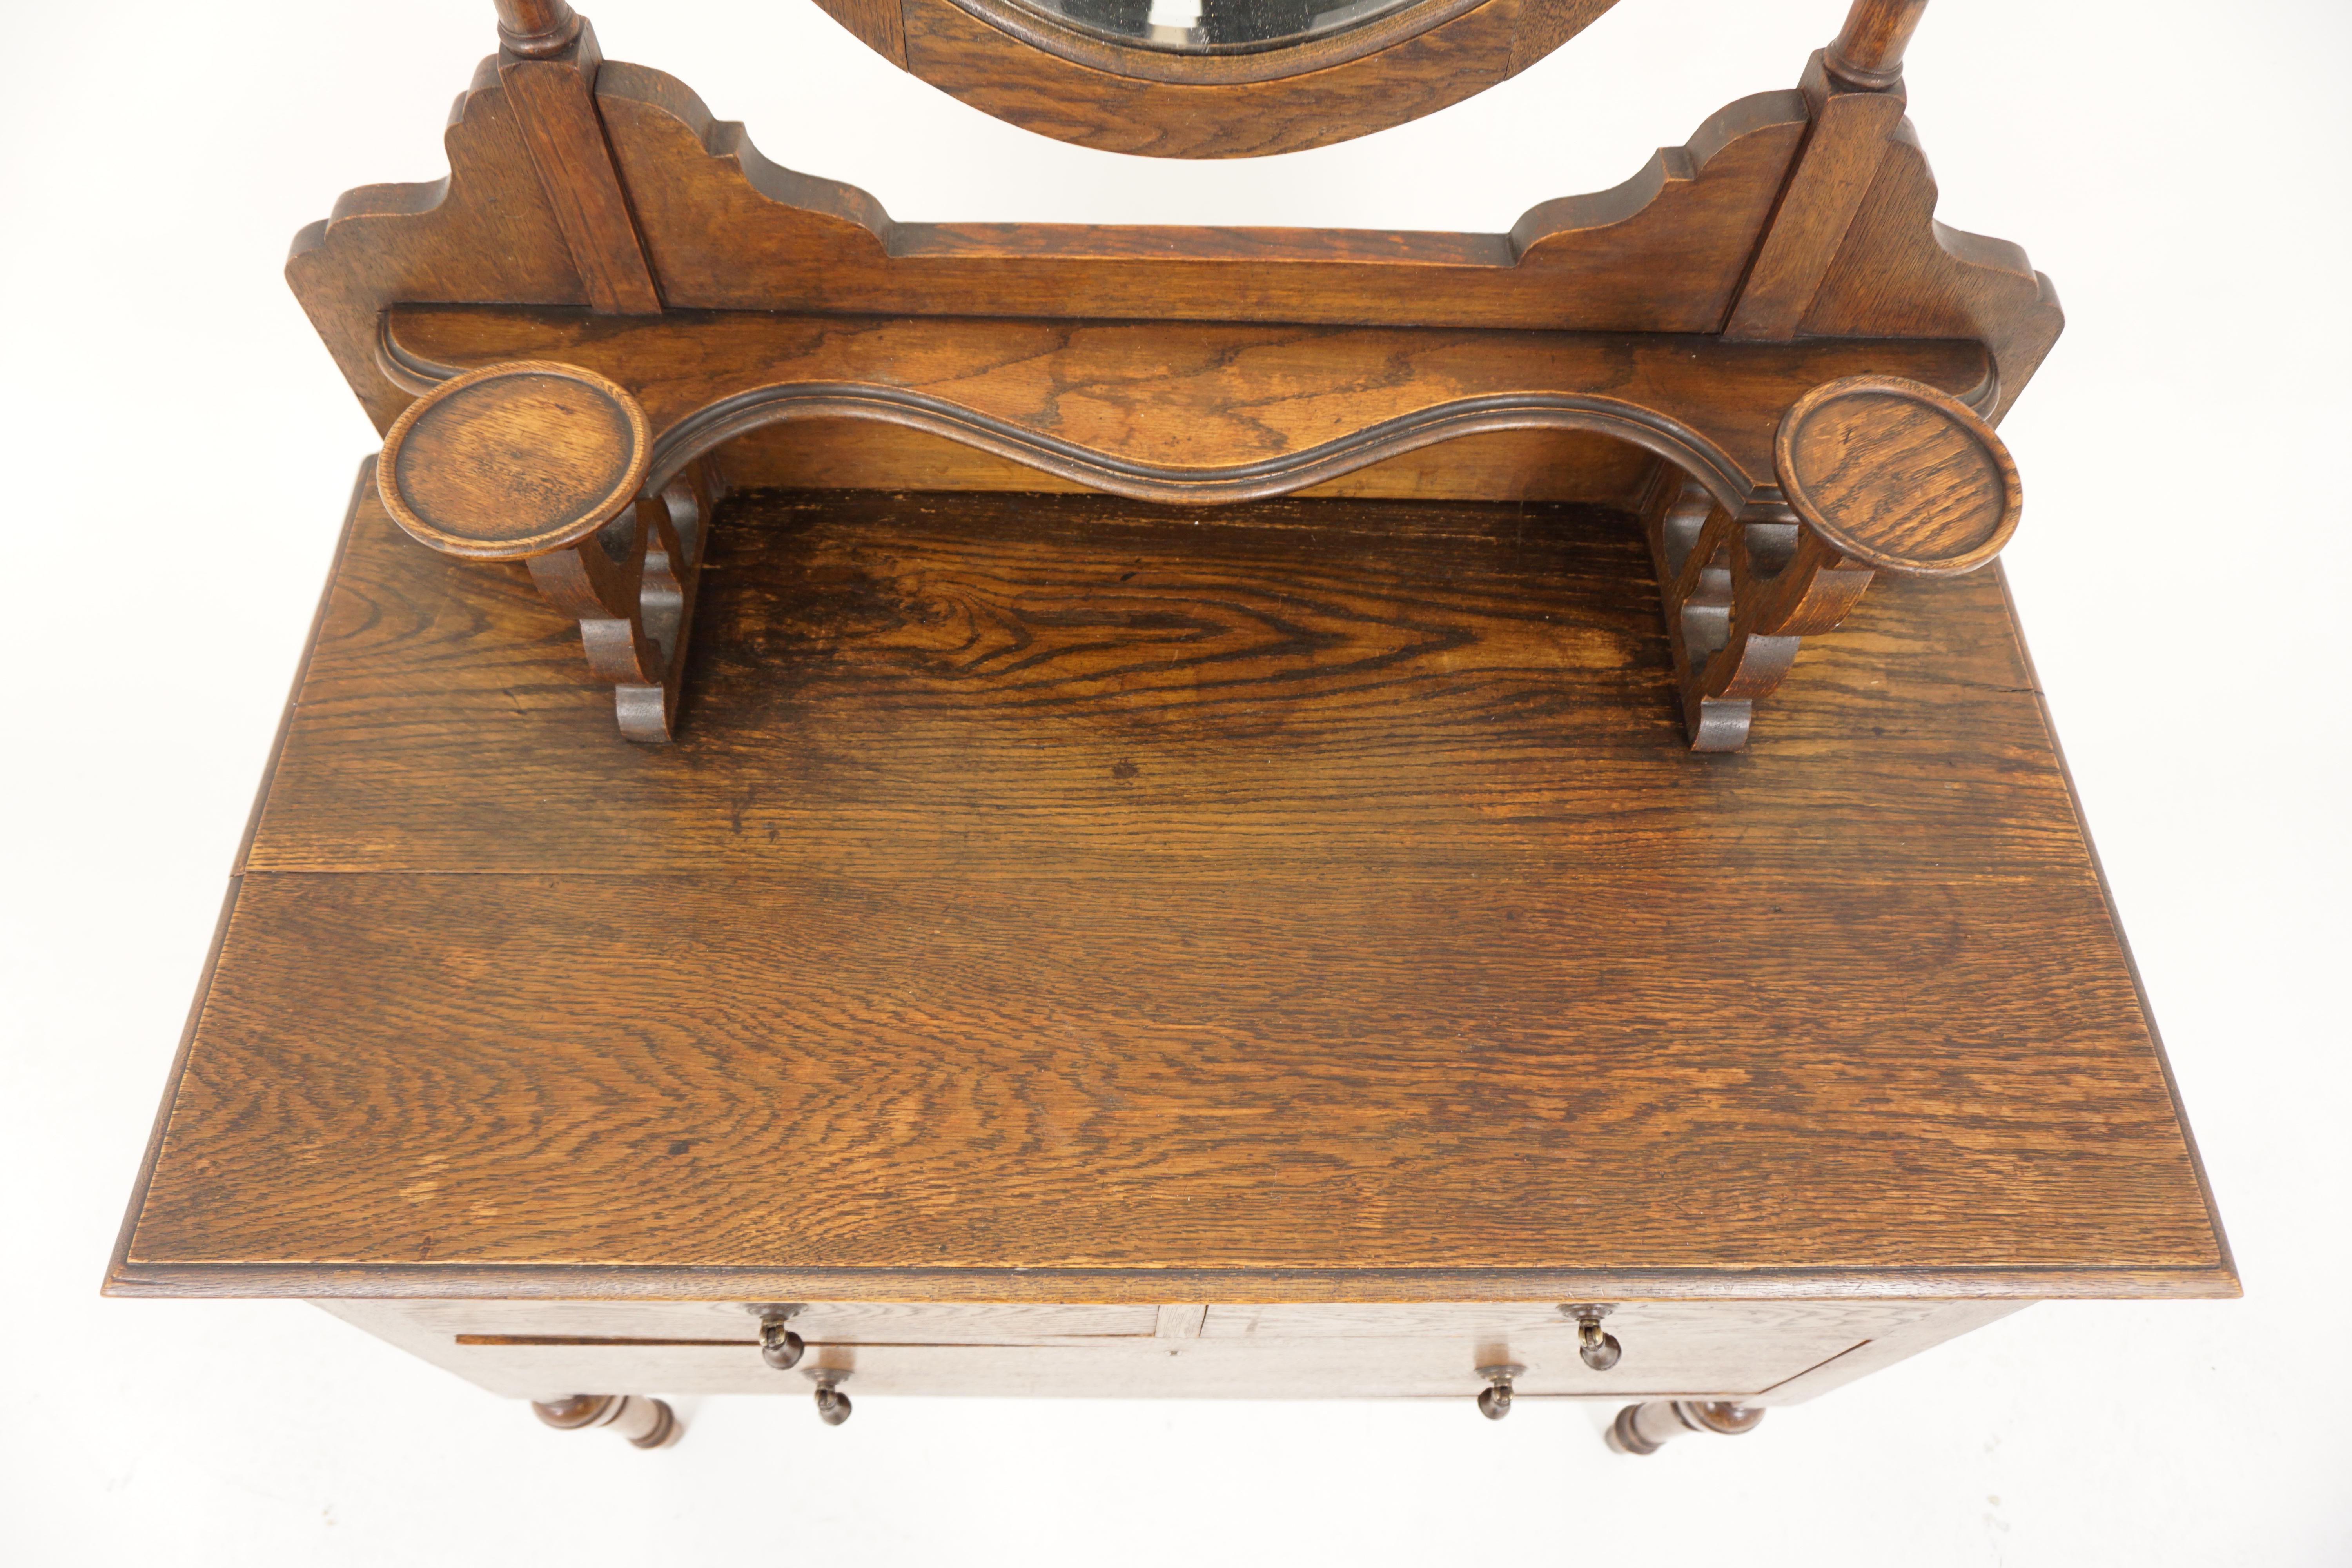 20th Century Arts & Crafts Oak Vanity, Dressing Chest, Chest of Drawers, Scotland 1910, H888